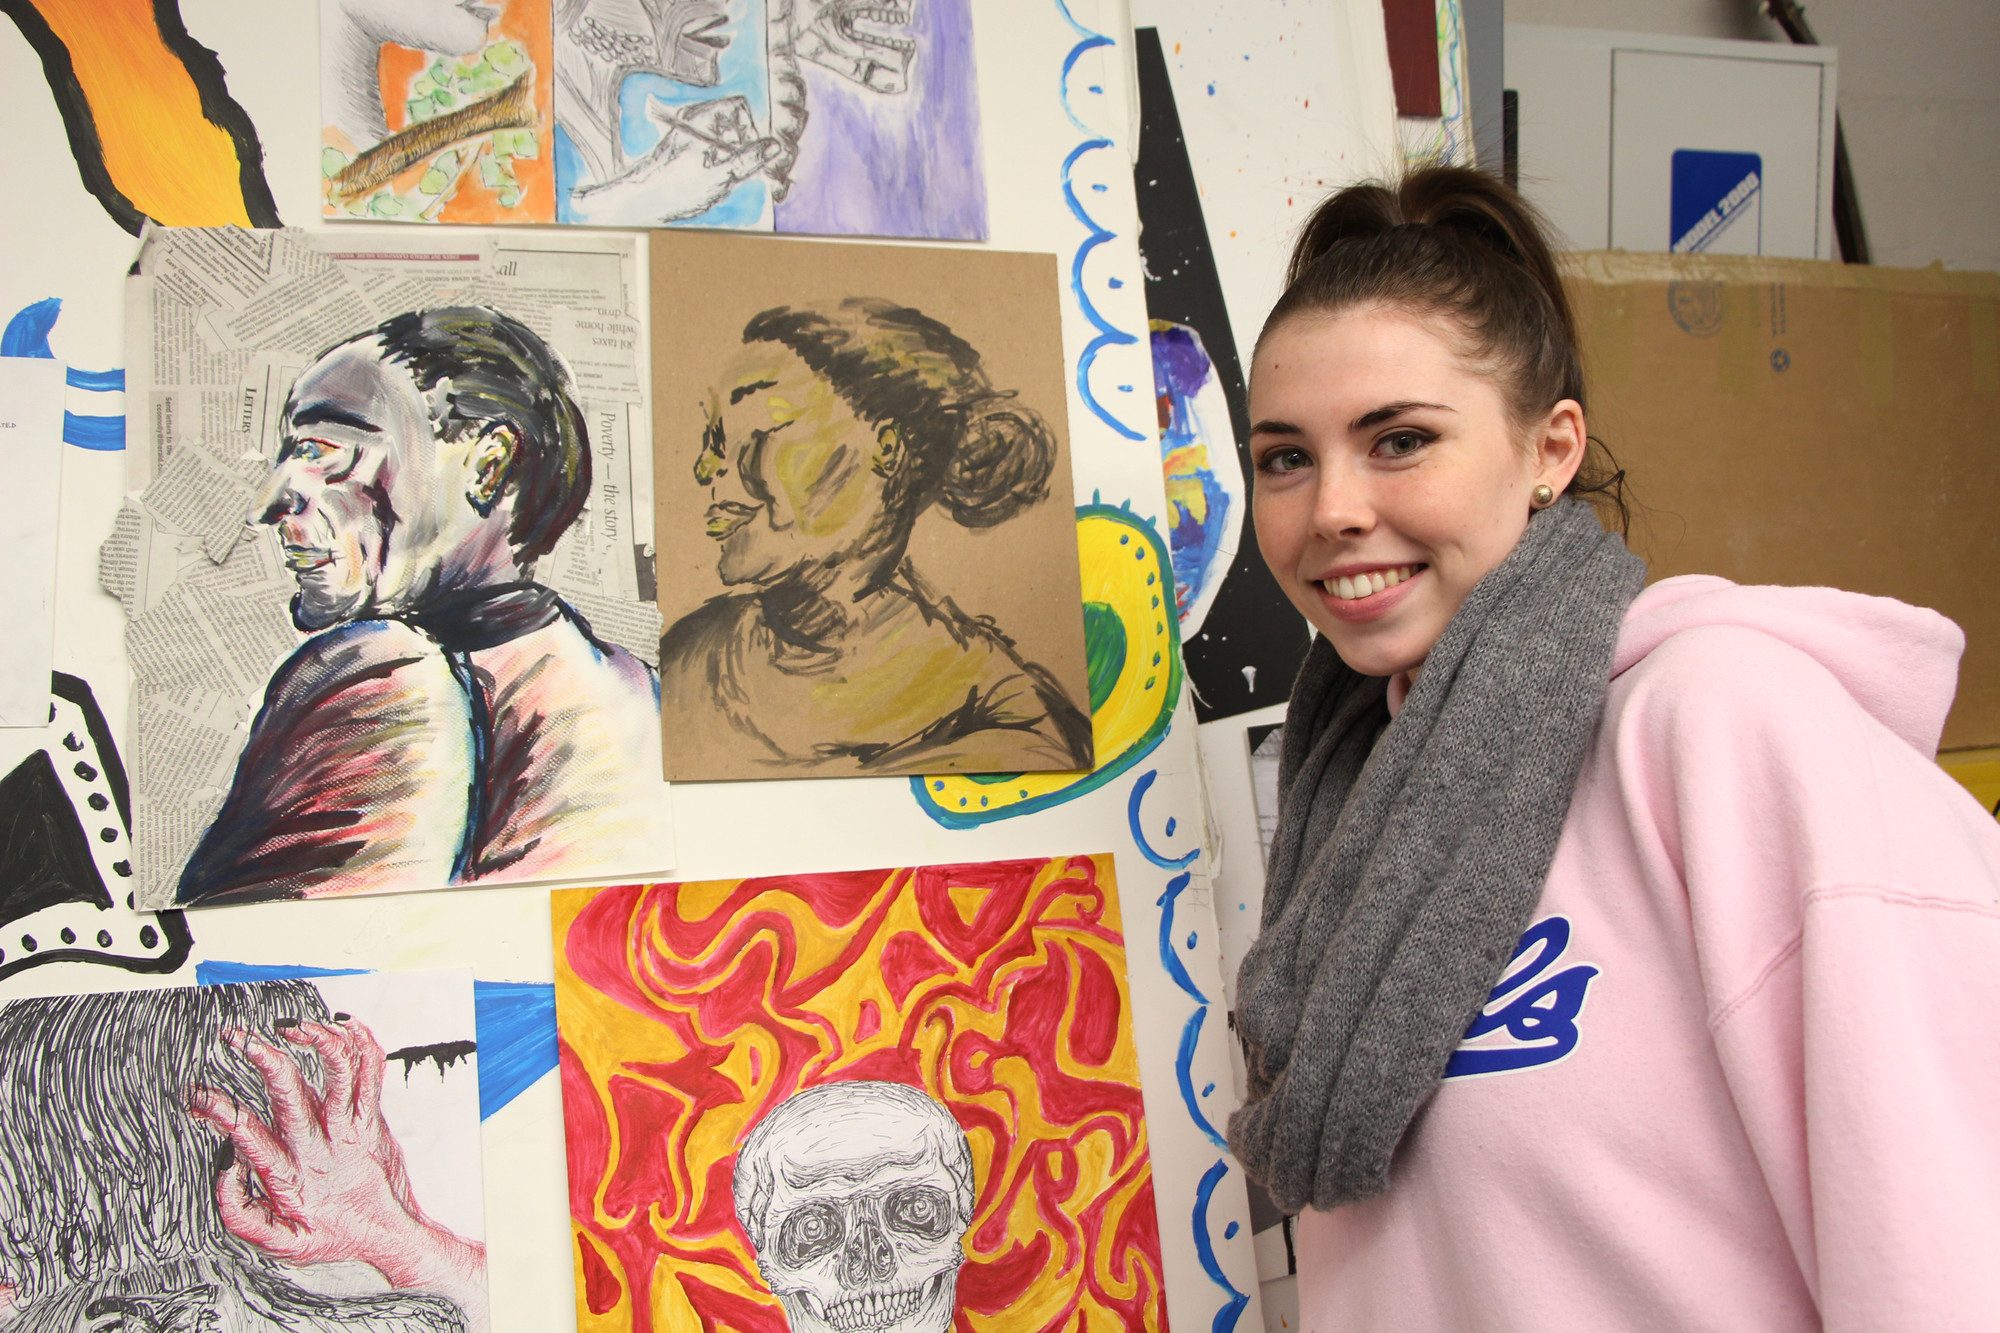 Caitlin Airey, 17 and a BHS senior, had several works of art on display. She used chalk, paints, pencils and markers to make her illustrations come to life.